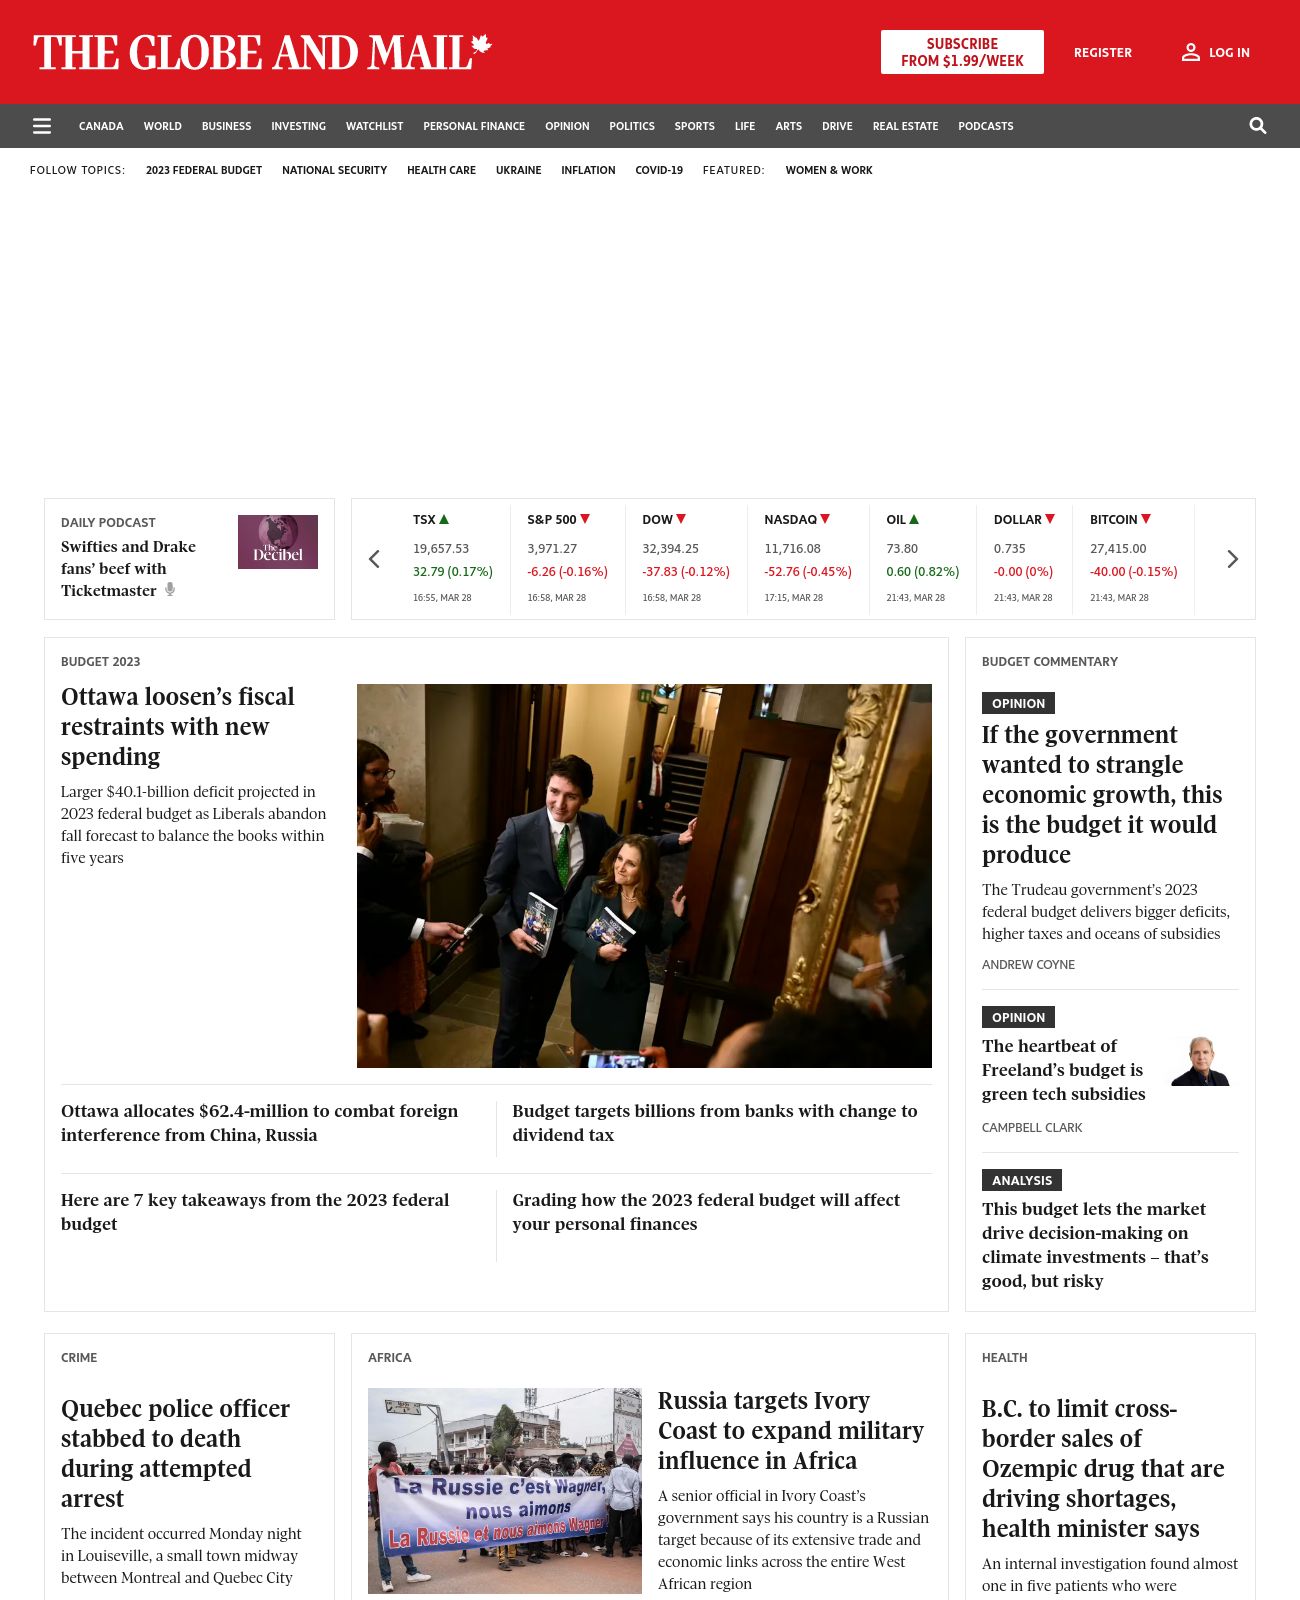 The Globe and Mail at 2023-03-28 22:02:38-04:00 local time